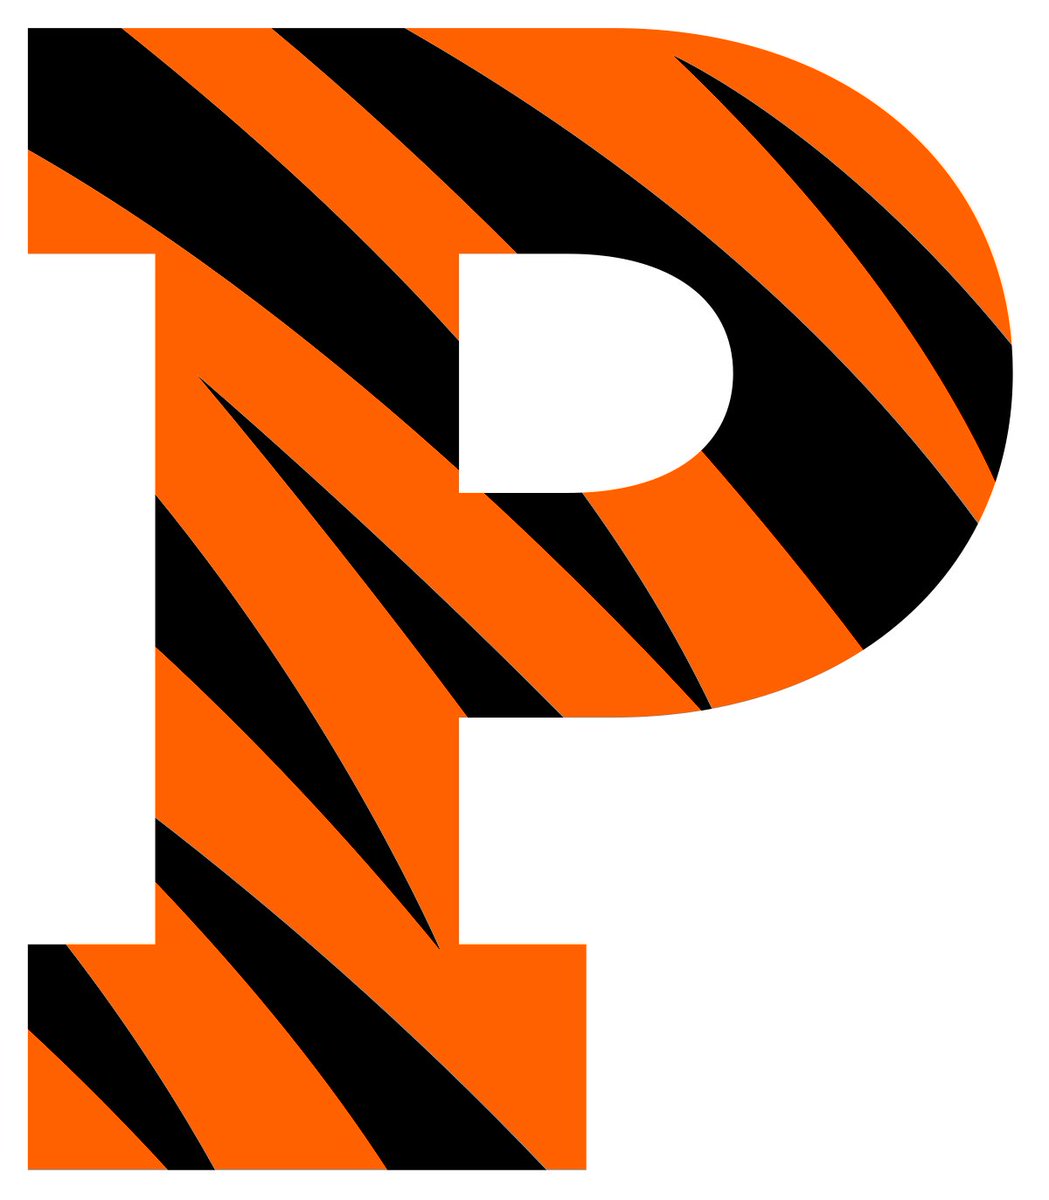 Grateful for the invite from Coach Bertz and opportunity to compete at Princeton Football Camp. @HebronLionsFB @jonathan_gess @Terrencemelton @Coach_Mende @andrew_bertz @CoachGatorTKO @rvfc10